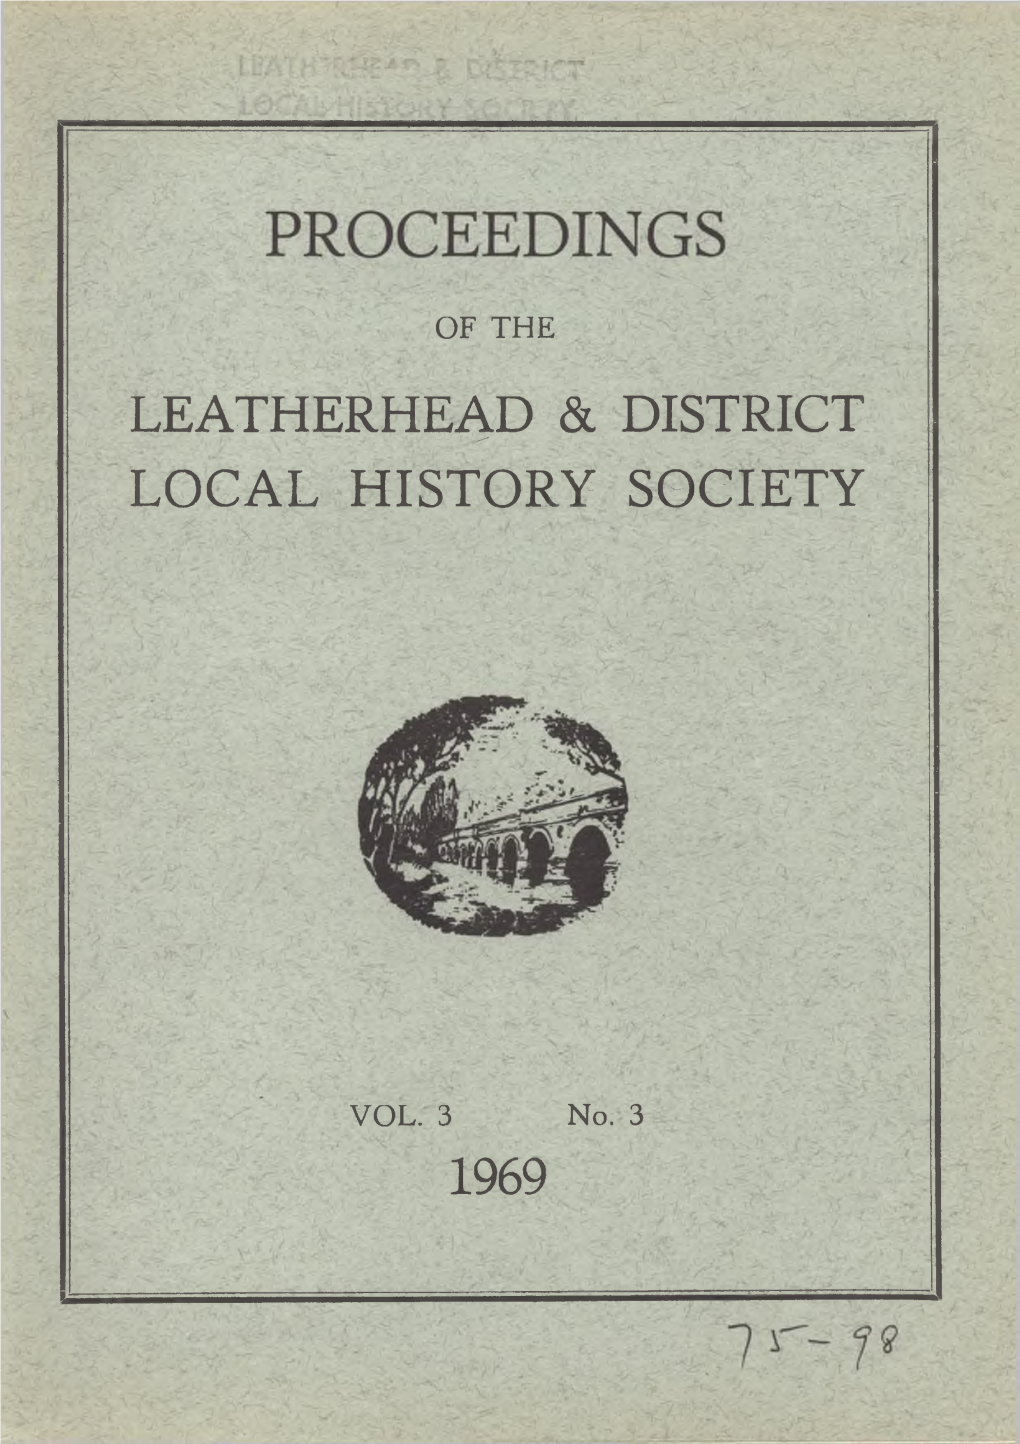 Leatherhead & District Local History Society Archive